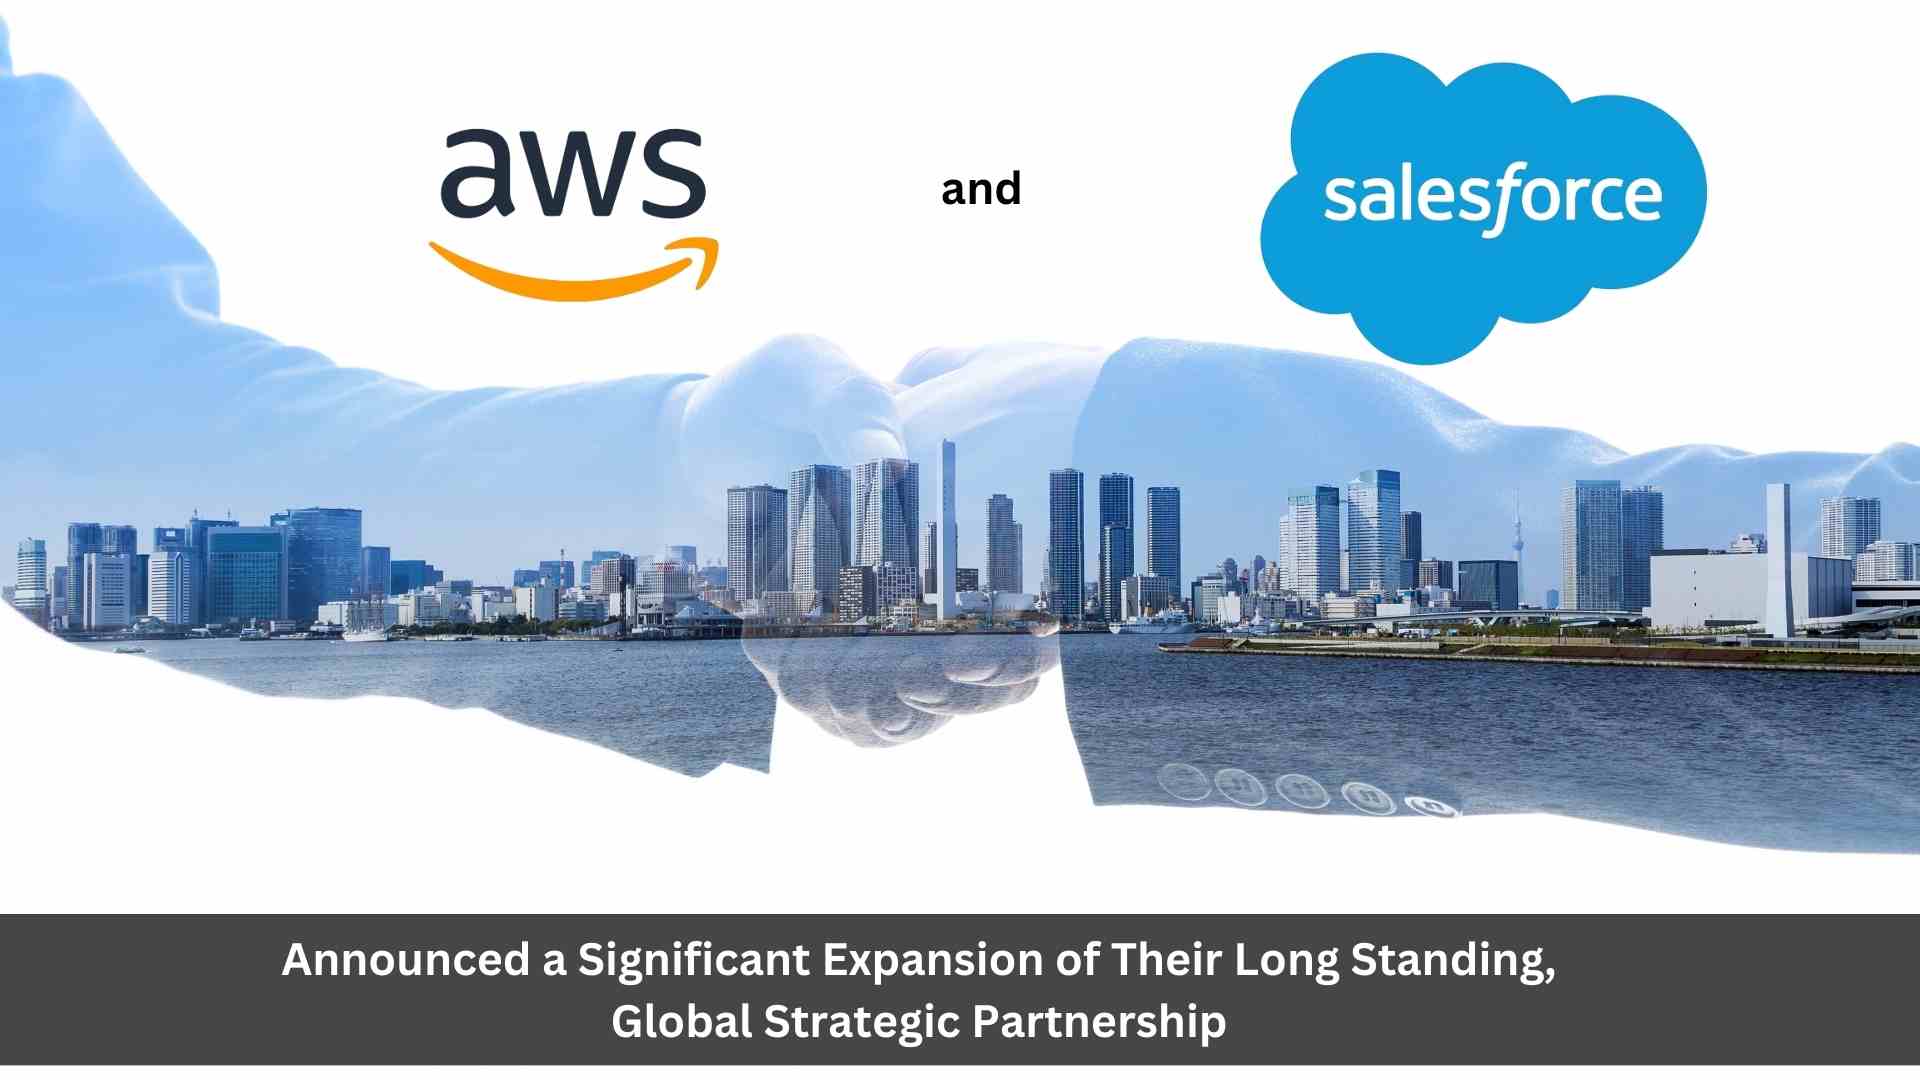 Salesforce and AWS Expand Partnership for Customers to More Easily Build Trusted AI Apps, Deliver Seamless CRM Experiences, and Bring Salesforce Products to AWS Marketplace